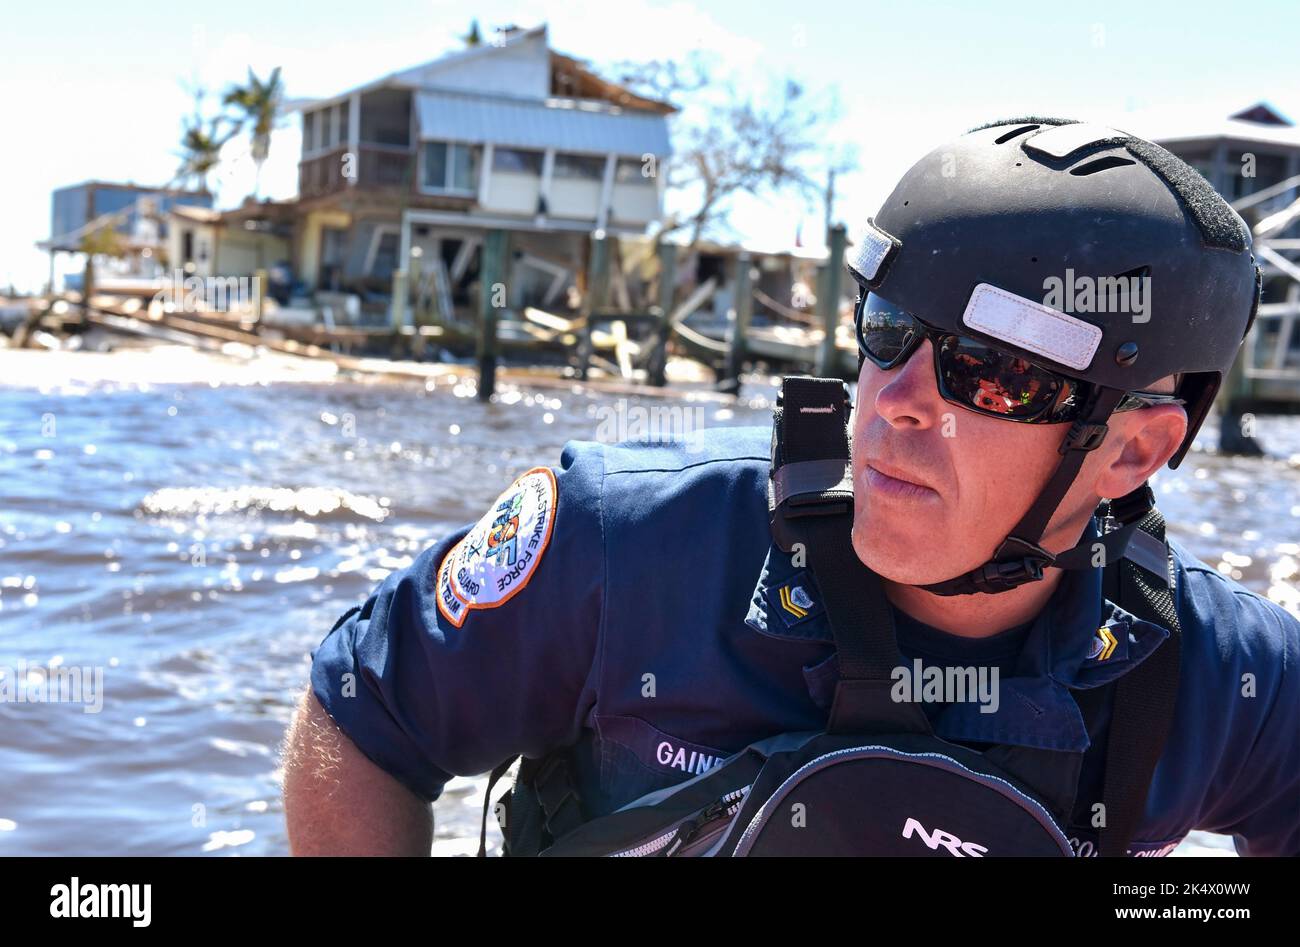 In the aftermath of Hurricane Ian, Hunter Gaines, assigned to the U.S. Coast Guard's Gulf Strike Team, transits the waters off of Matlacha, Florida, on October 2, 2022. The Coast Guard worked with state and local agencies, plus good Samaritans, to ensure the residents of Pine Island had transportation to the mainland as well as access to clean water and food in the wake of the hurricane. Stock Photo